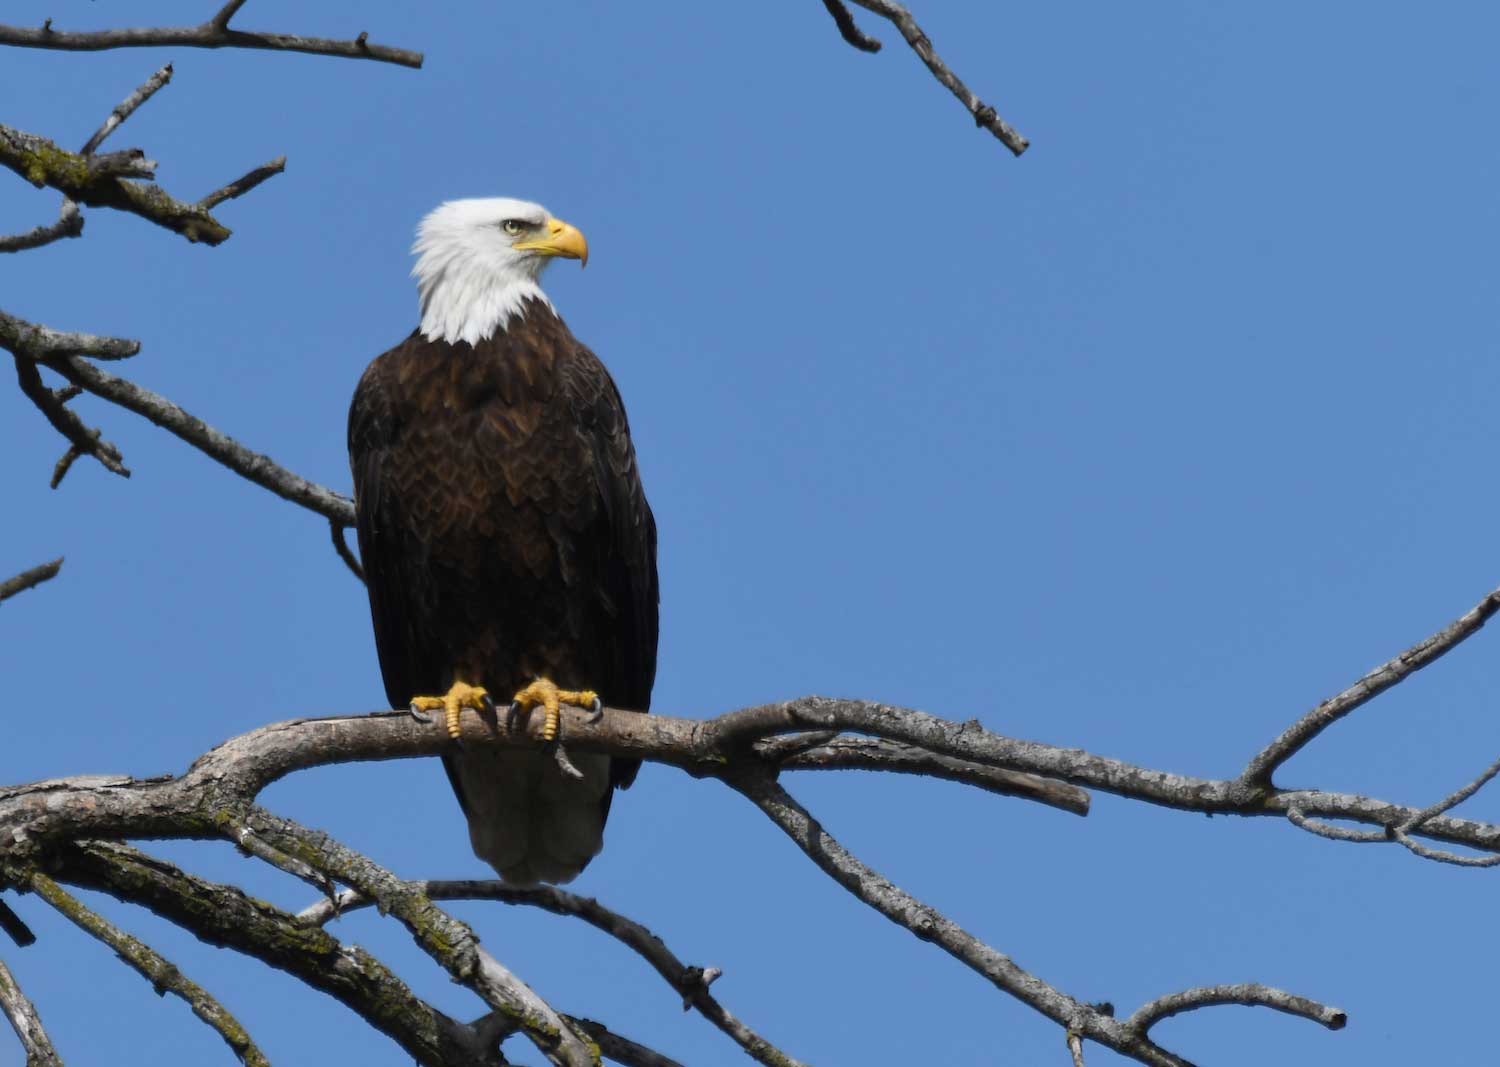 A bald eagle perched on a bare tree branch under a cloudless blue sky.